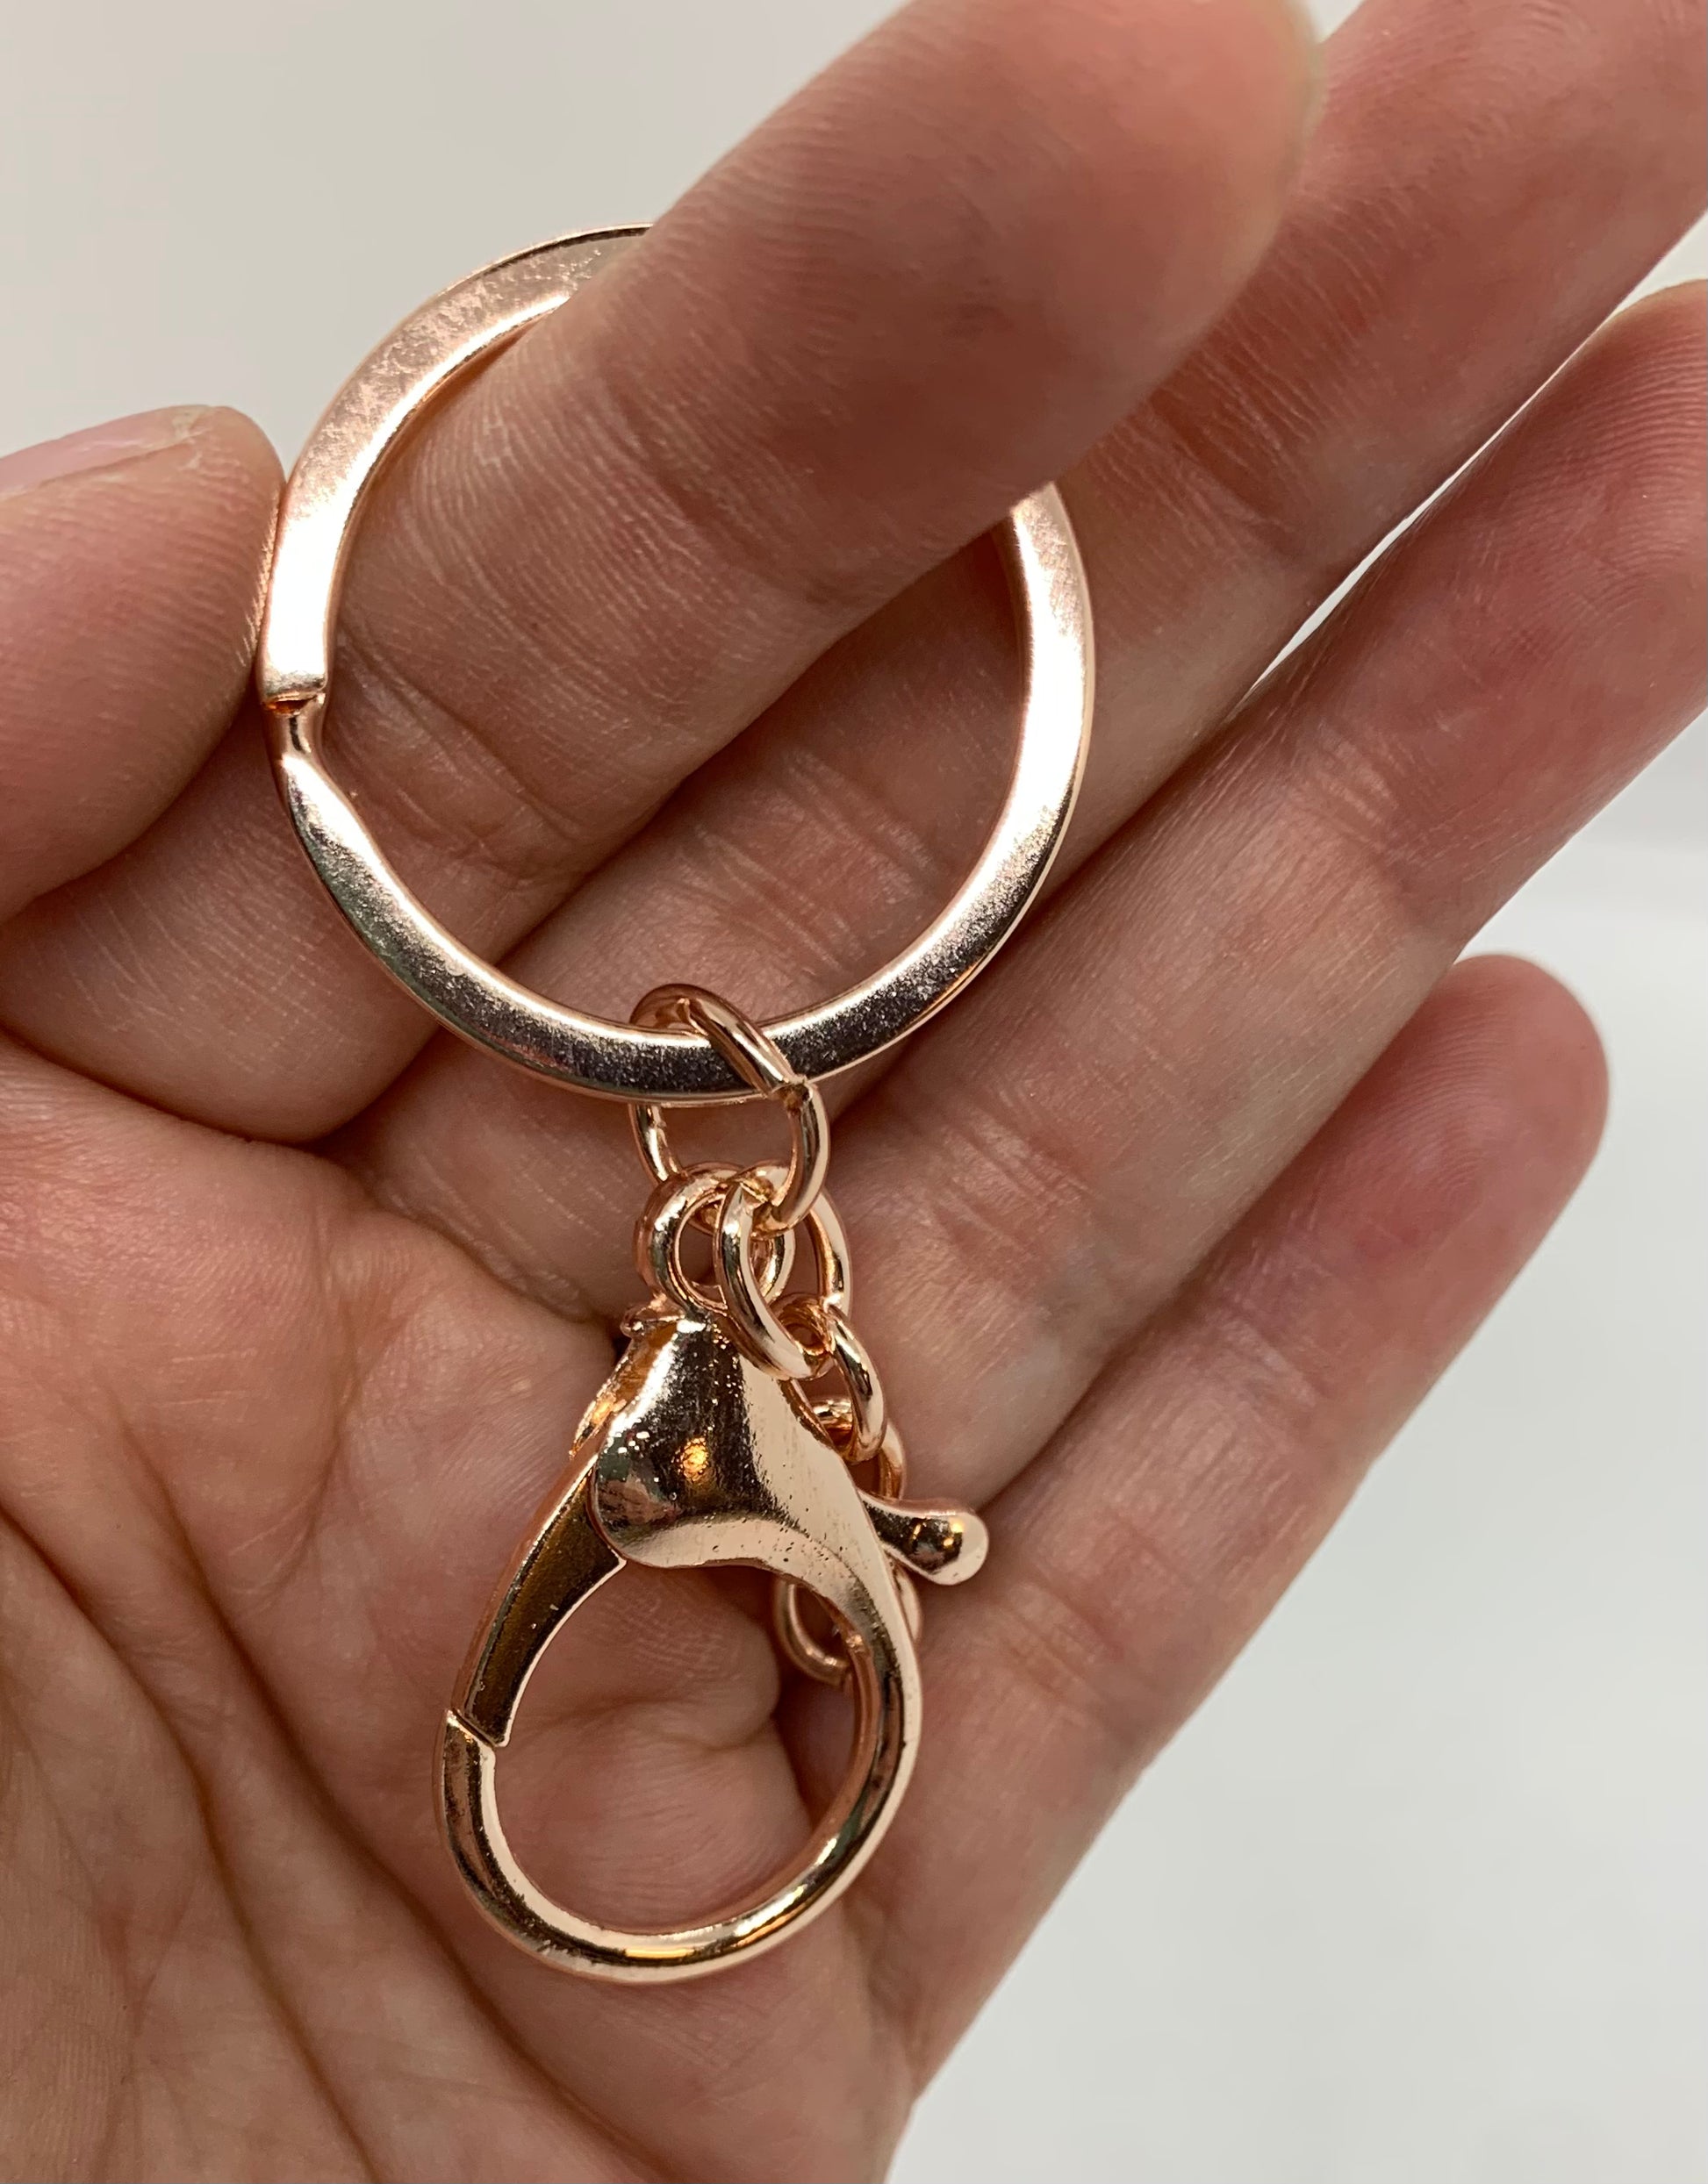 Lobster Claw Keychain Ring, Large Metal Keychain Ring 4. Bright Gold